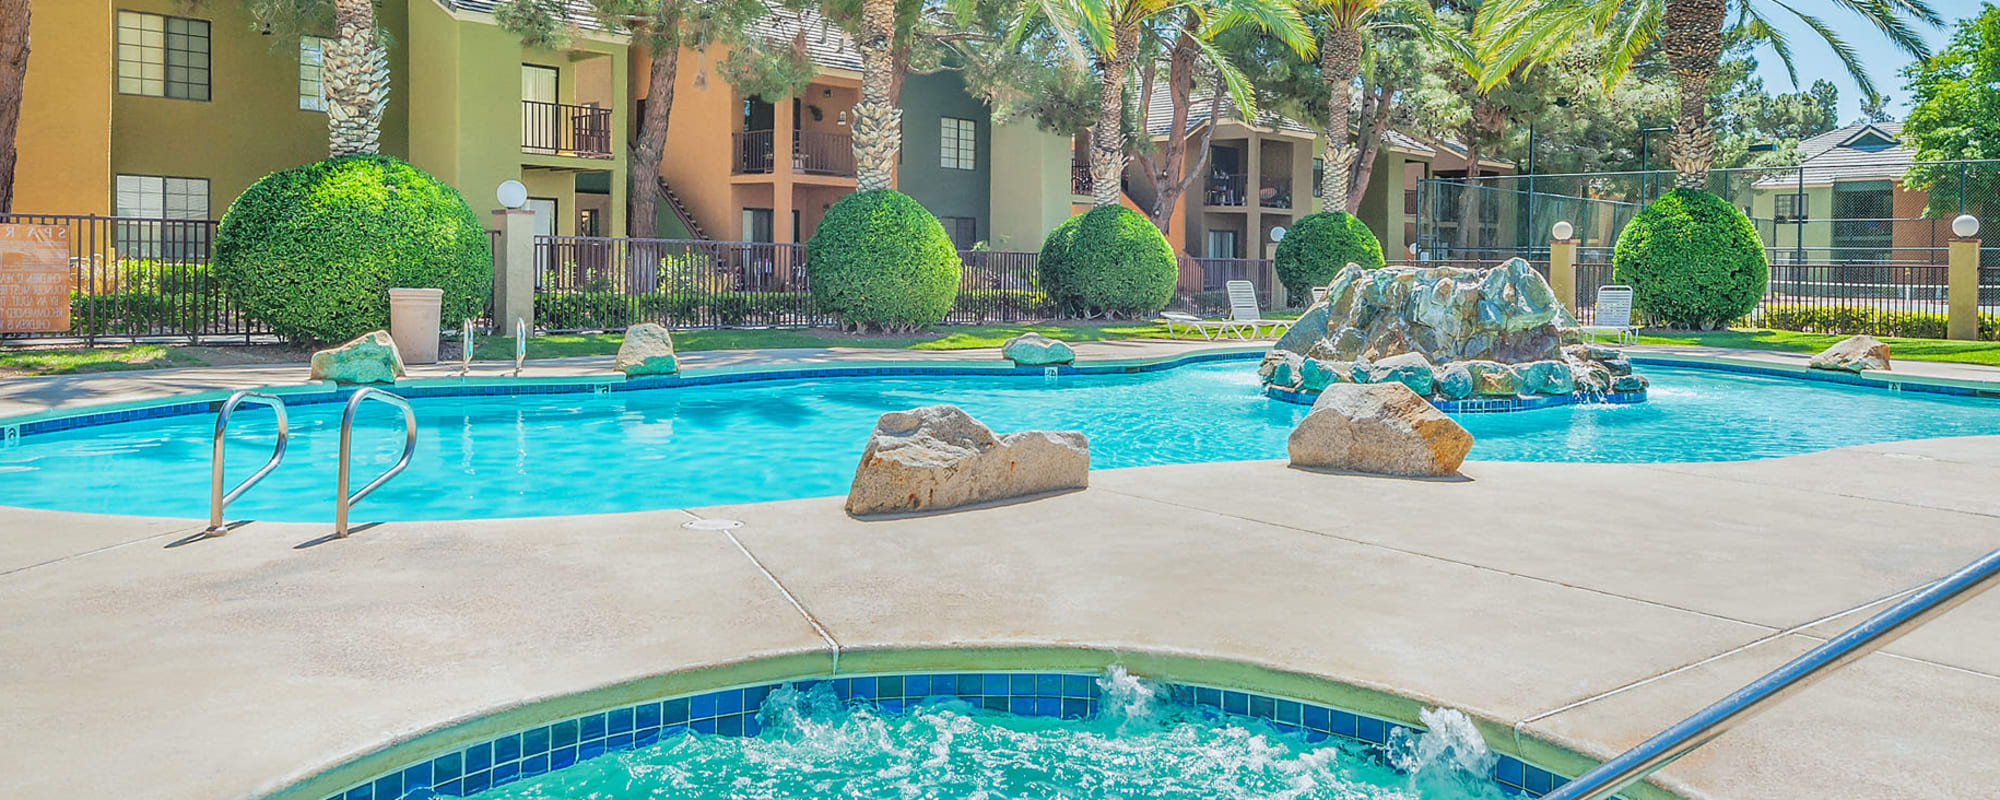 Schedule a tour of Shelter Cove Apartments in Las Vegas, Nevada